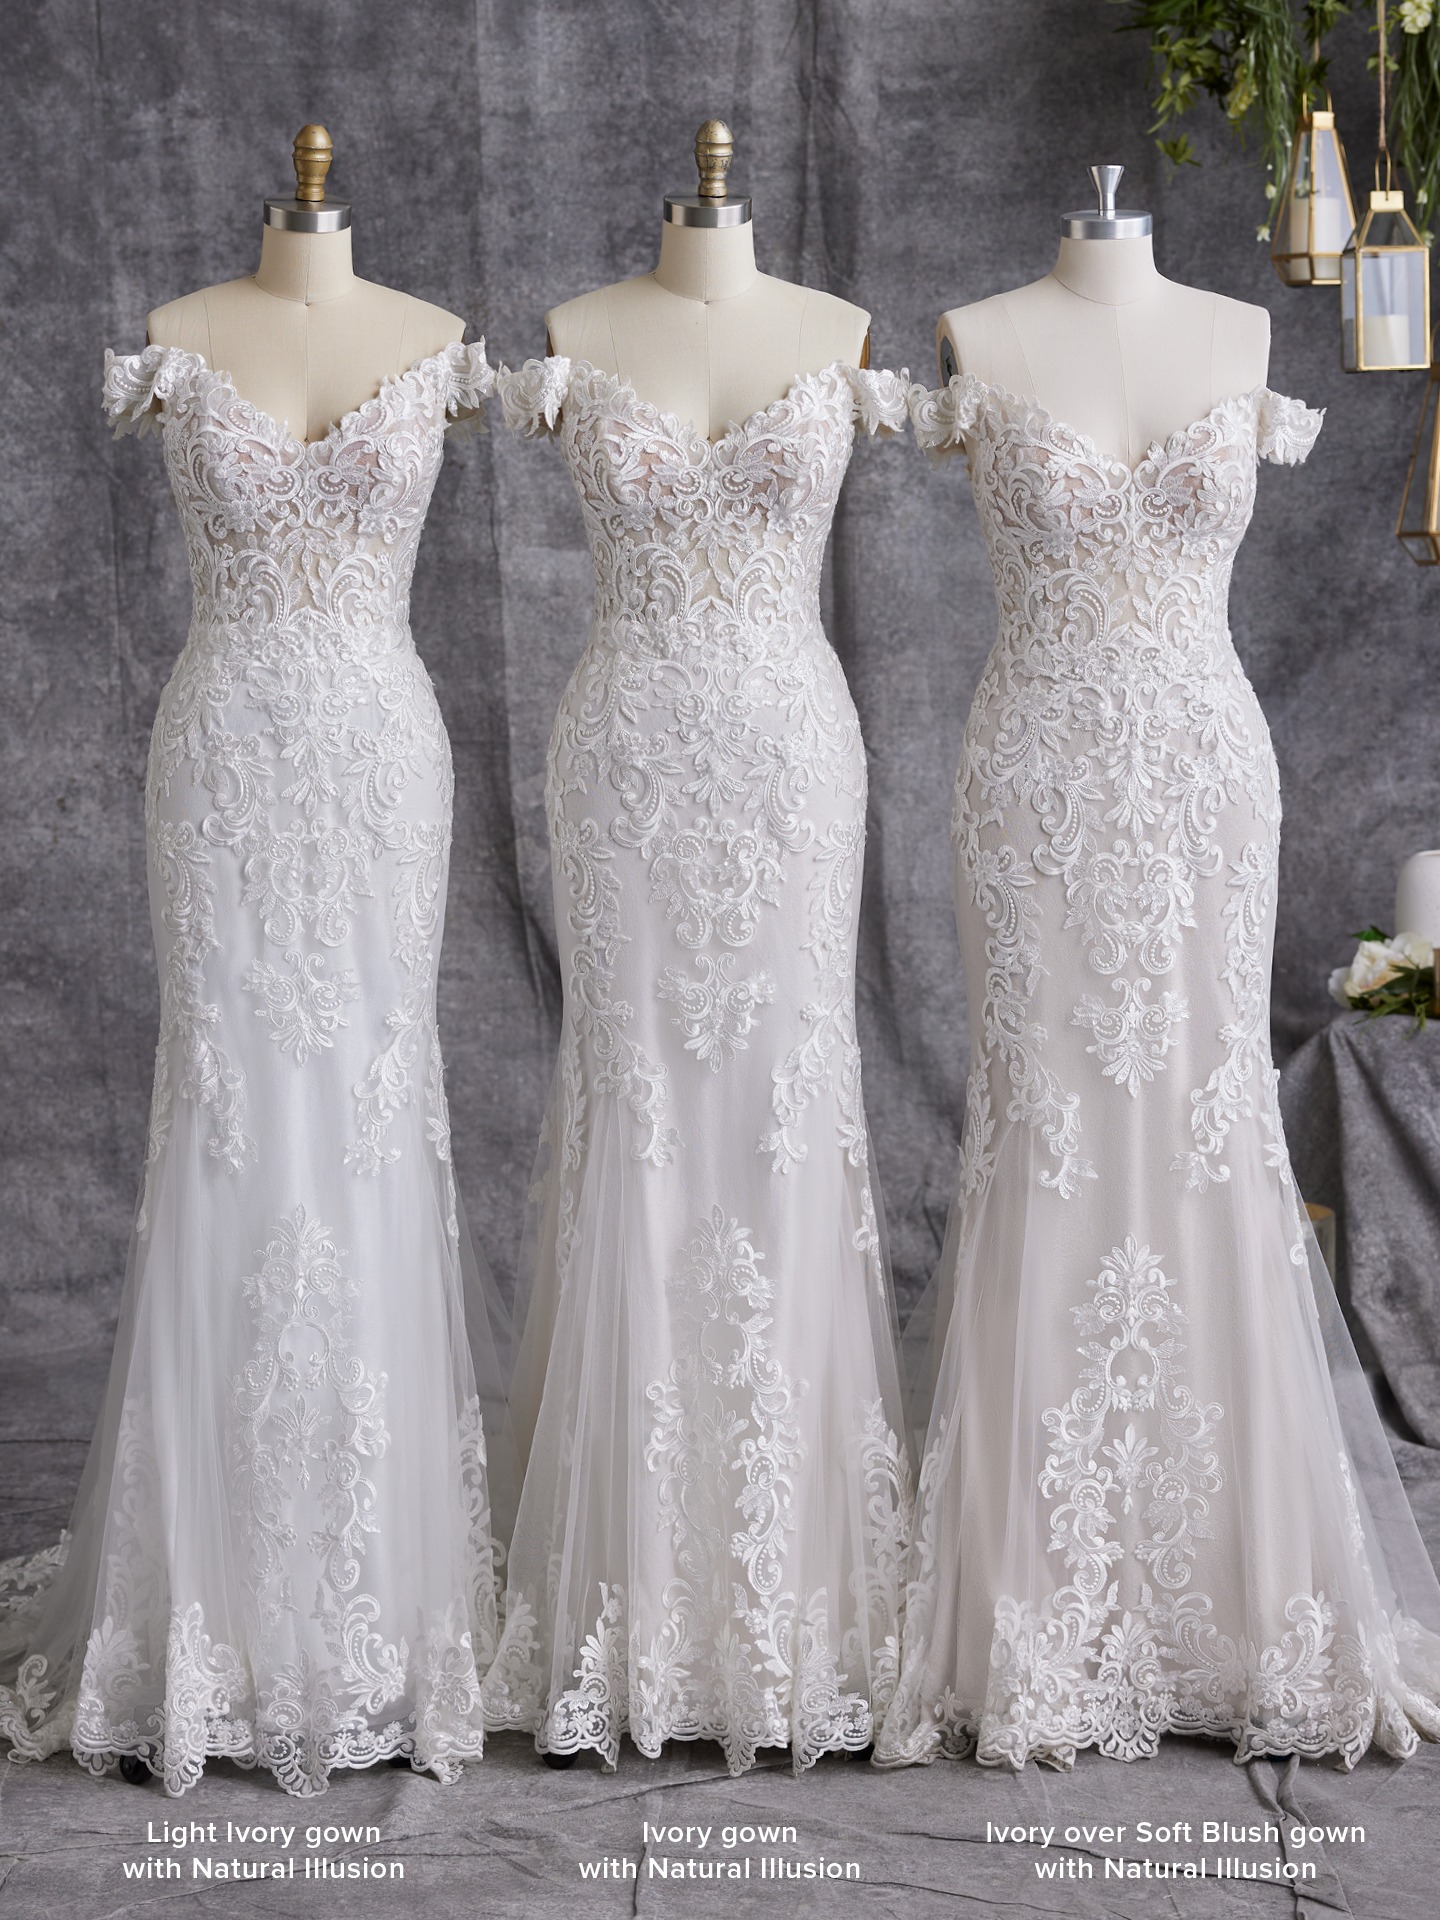 MEDEA / Blush Wedding Dress with Beading - LaceMarry